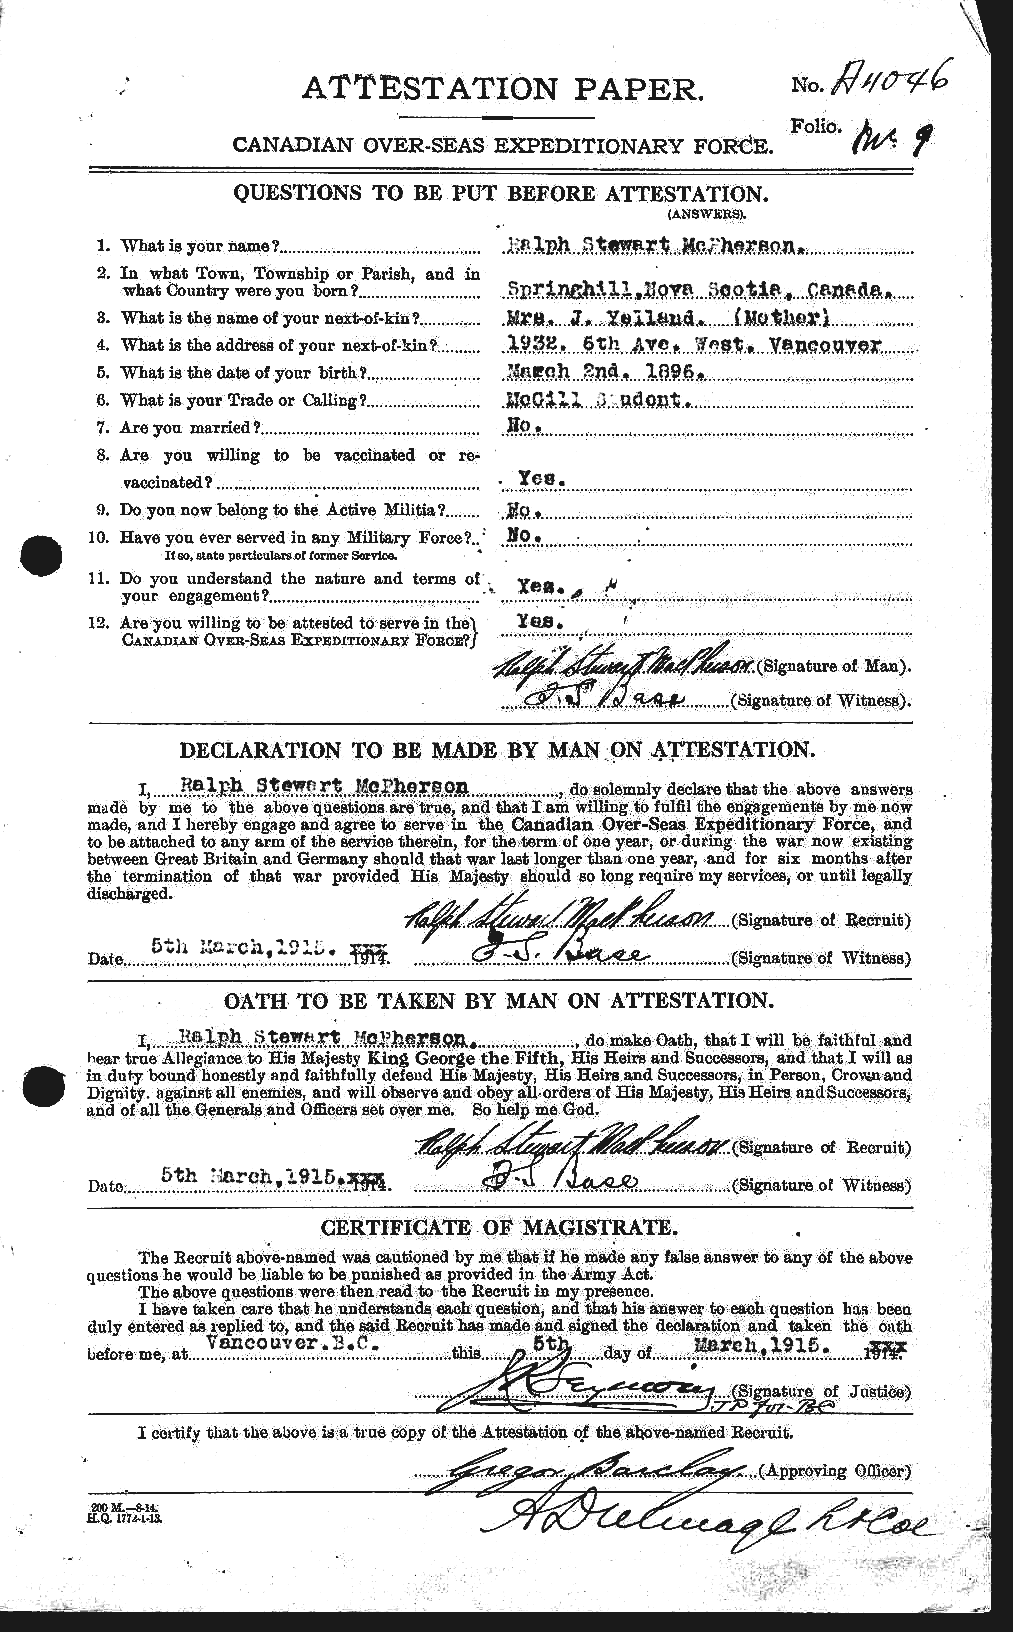 Personnel Records of the First World War - CEF 543249a